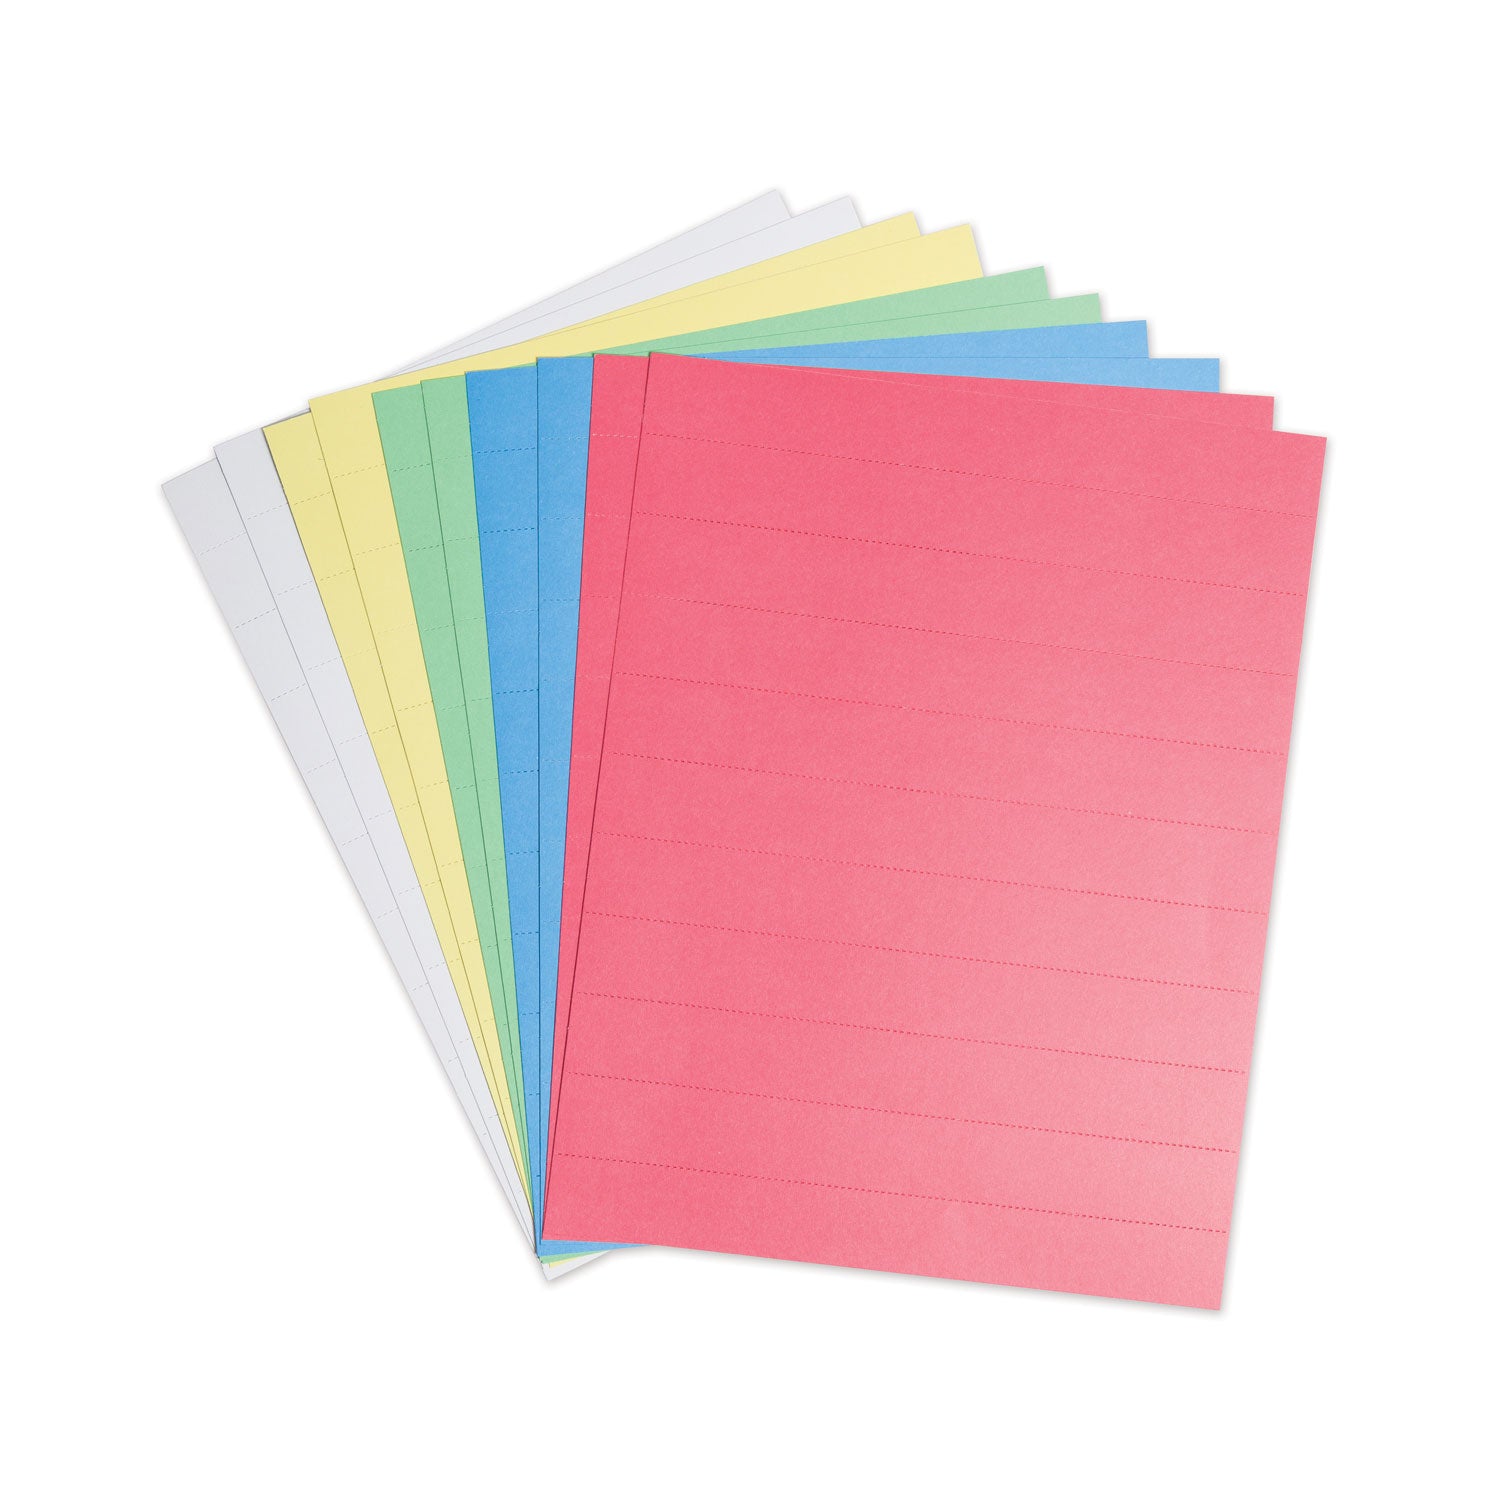 data-card-replacement-sheet-85-x-11-sheets-perforated-at-1-assorted-10-pack_ubrfm1614 - 1